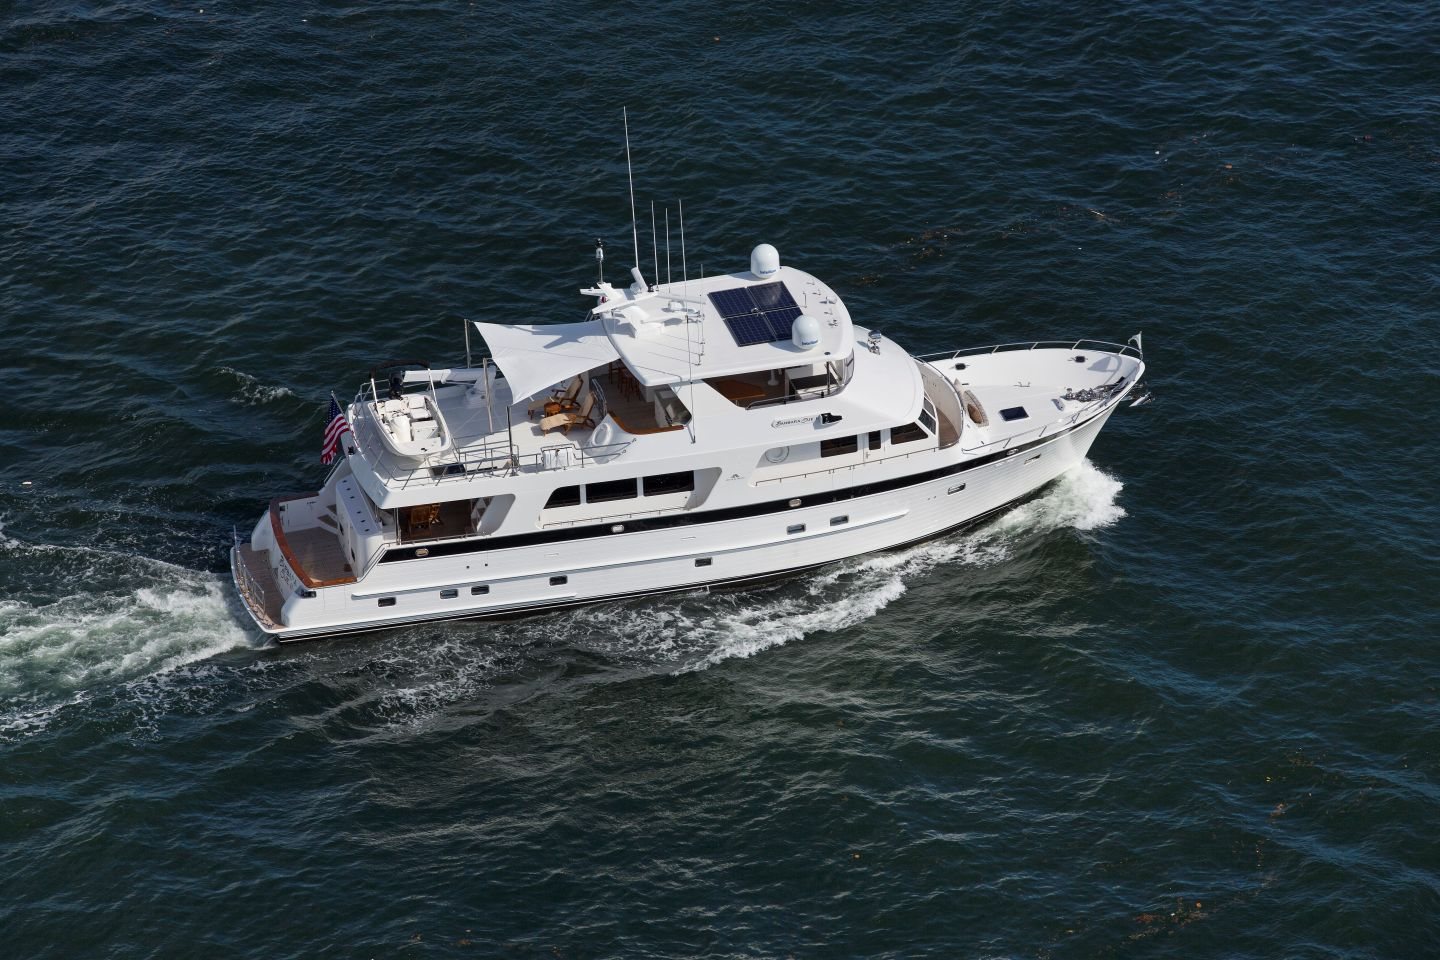 360 VR Virtual Tours of the Outer Reef 820 Cockpit Motoryacht